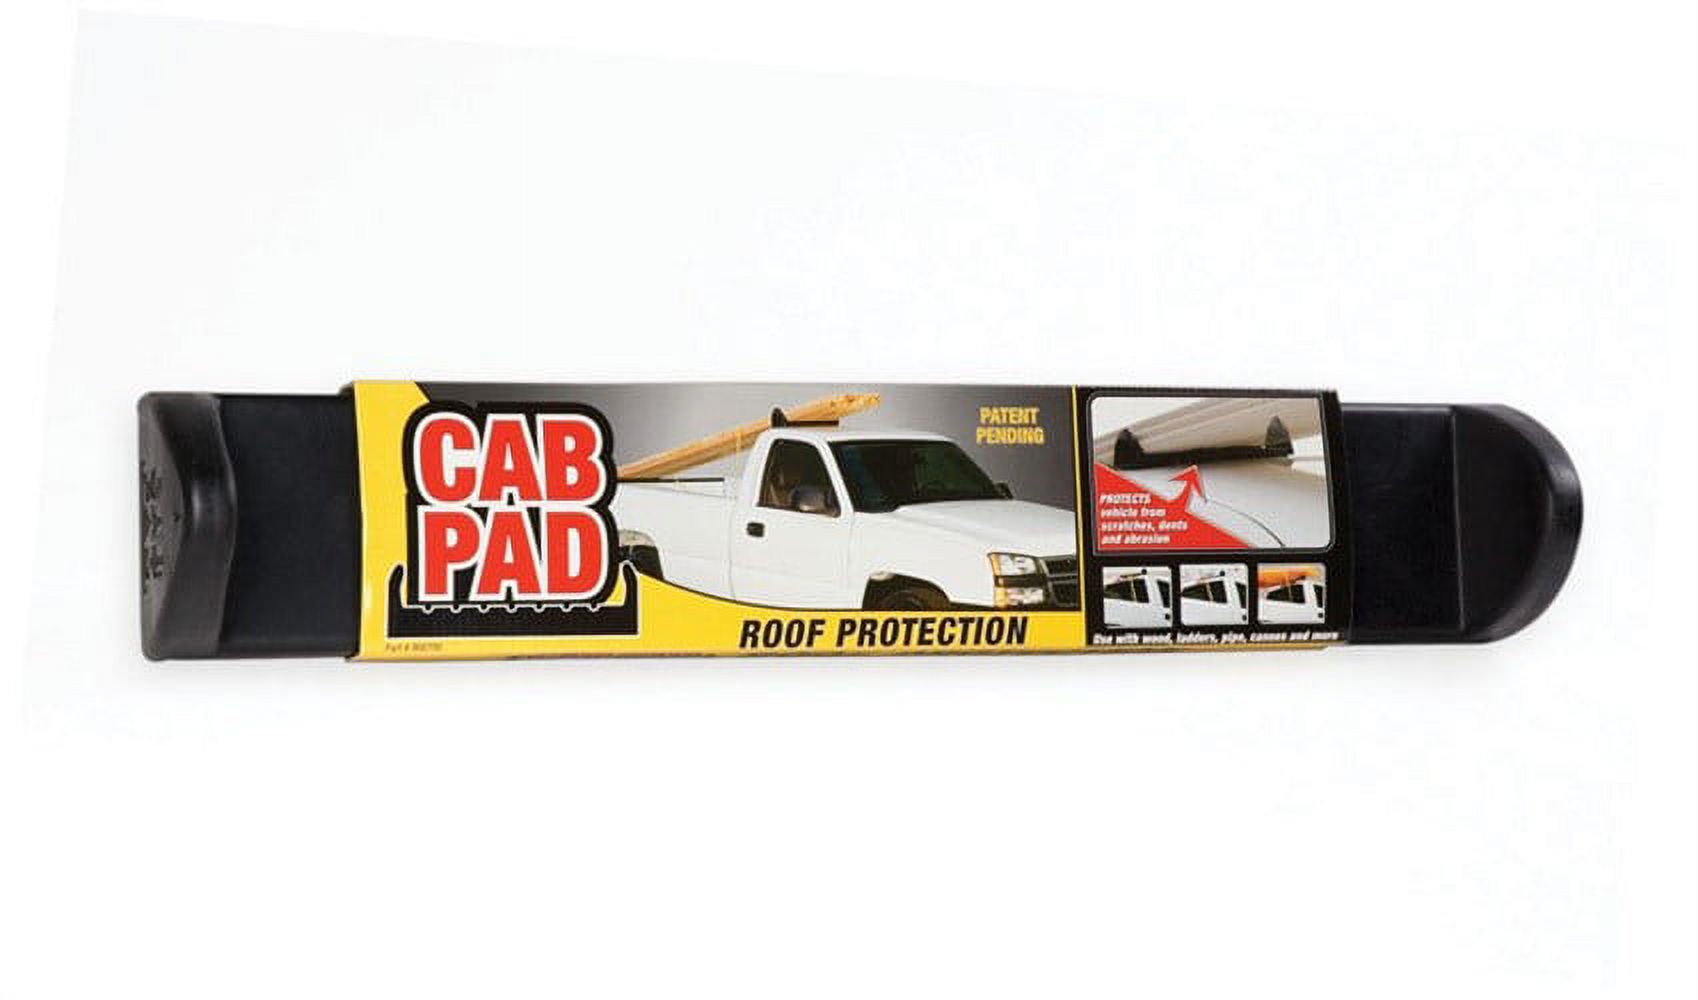 Progrip 900700 Single Cab Pad Roof Protector, Black - image 1 of 2